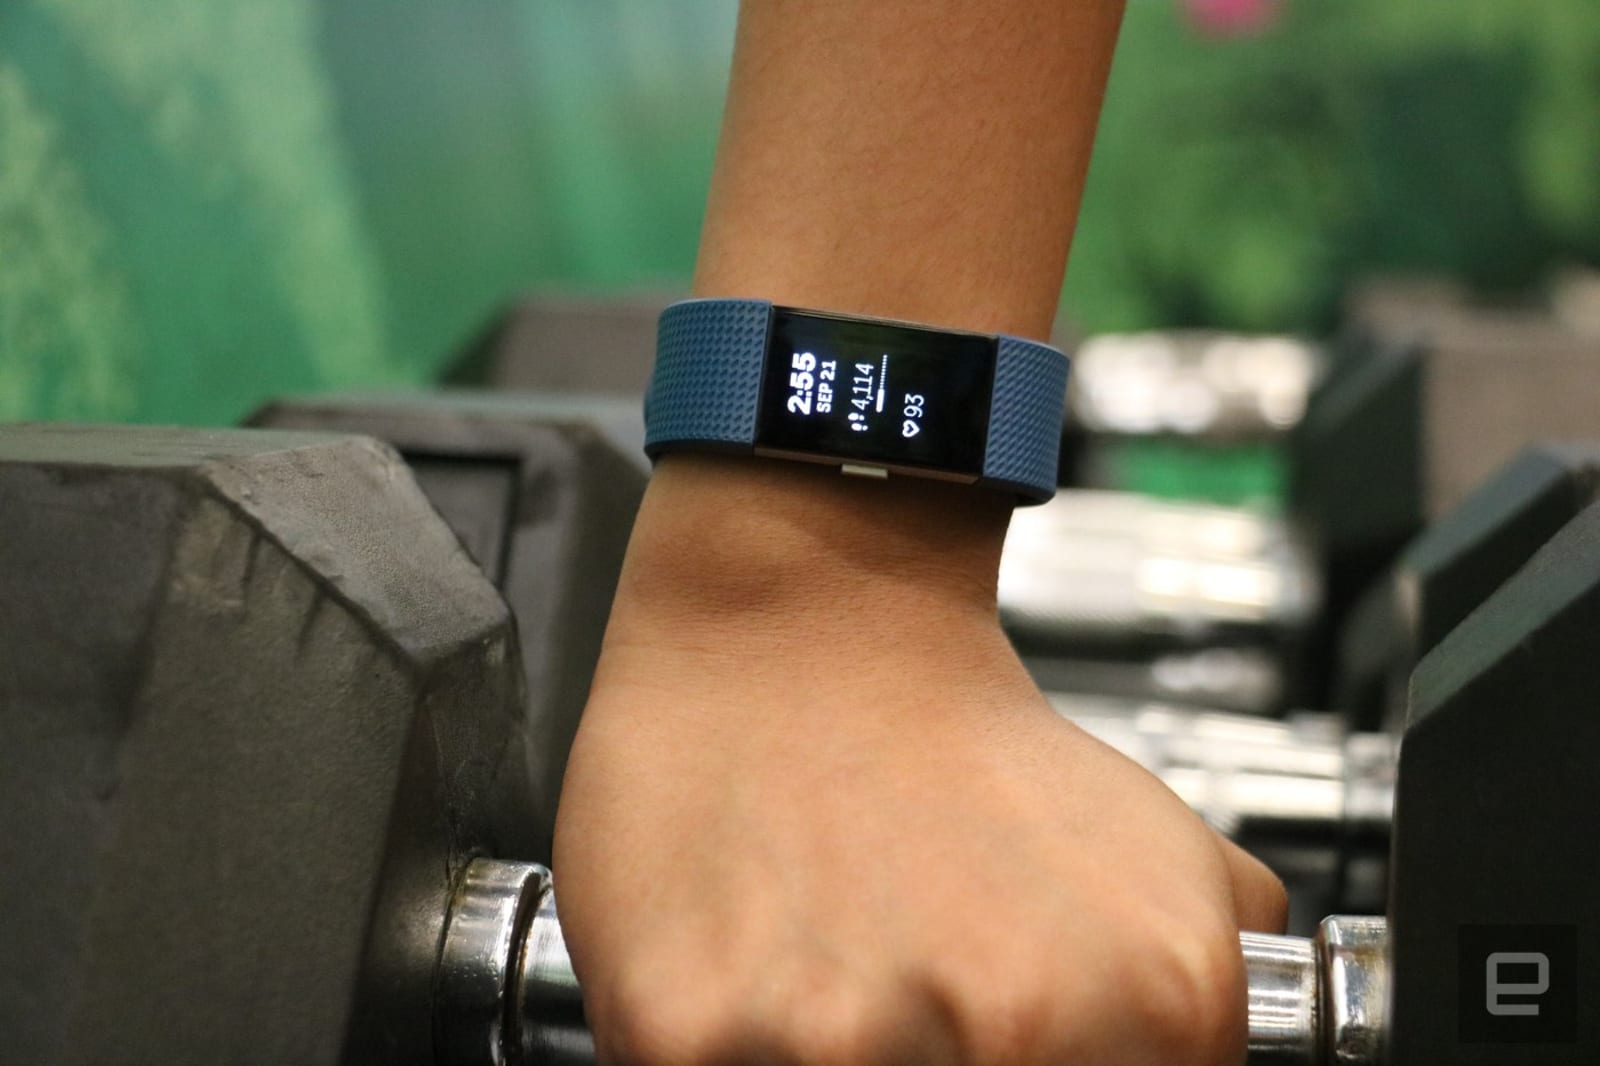 The Fitbit Charge upgrades are incremental, but necessary Engadget